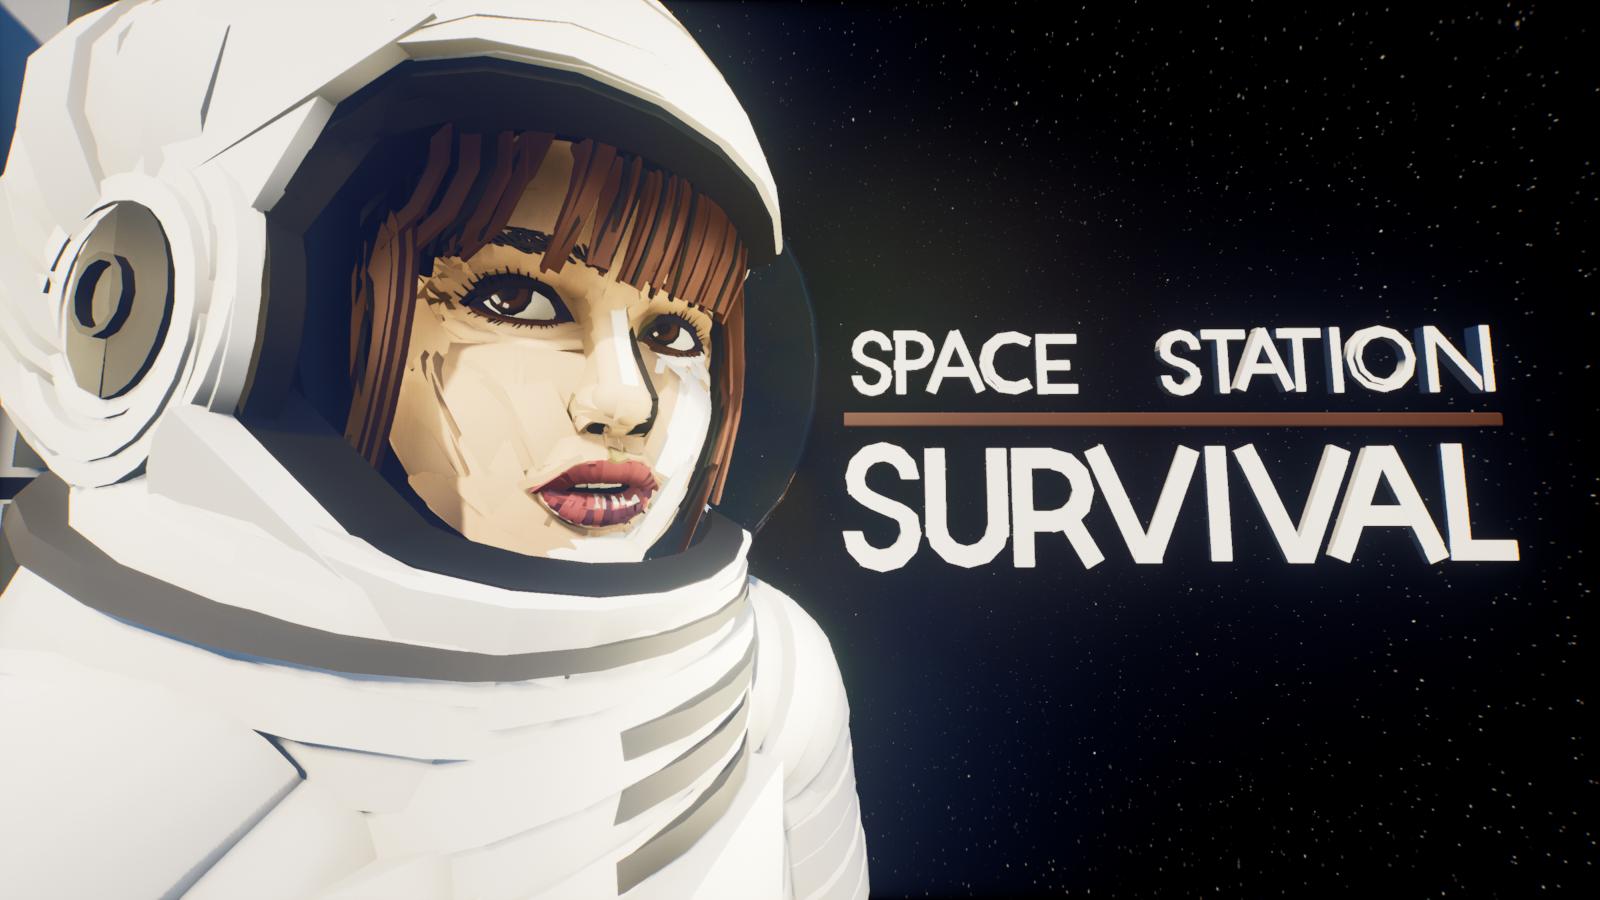 SPACE STATION SURVIVAL